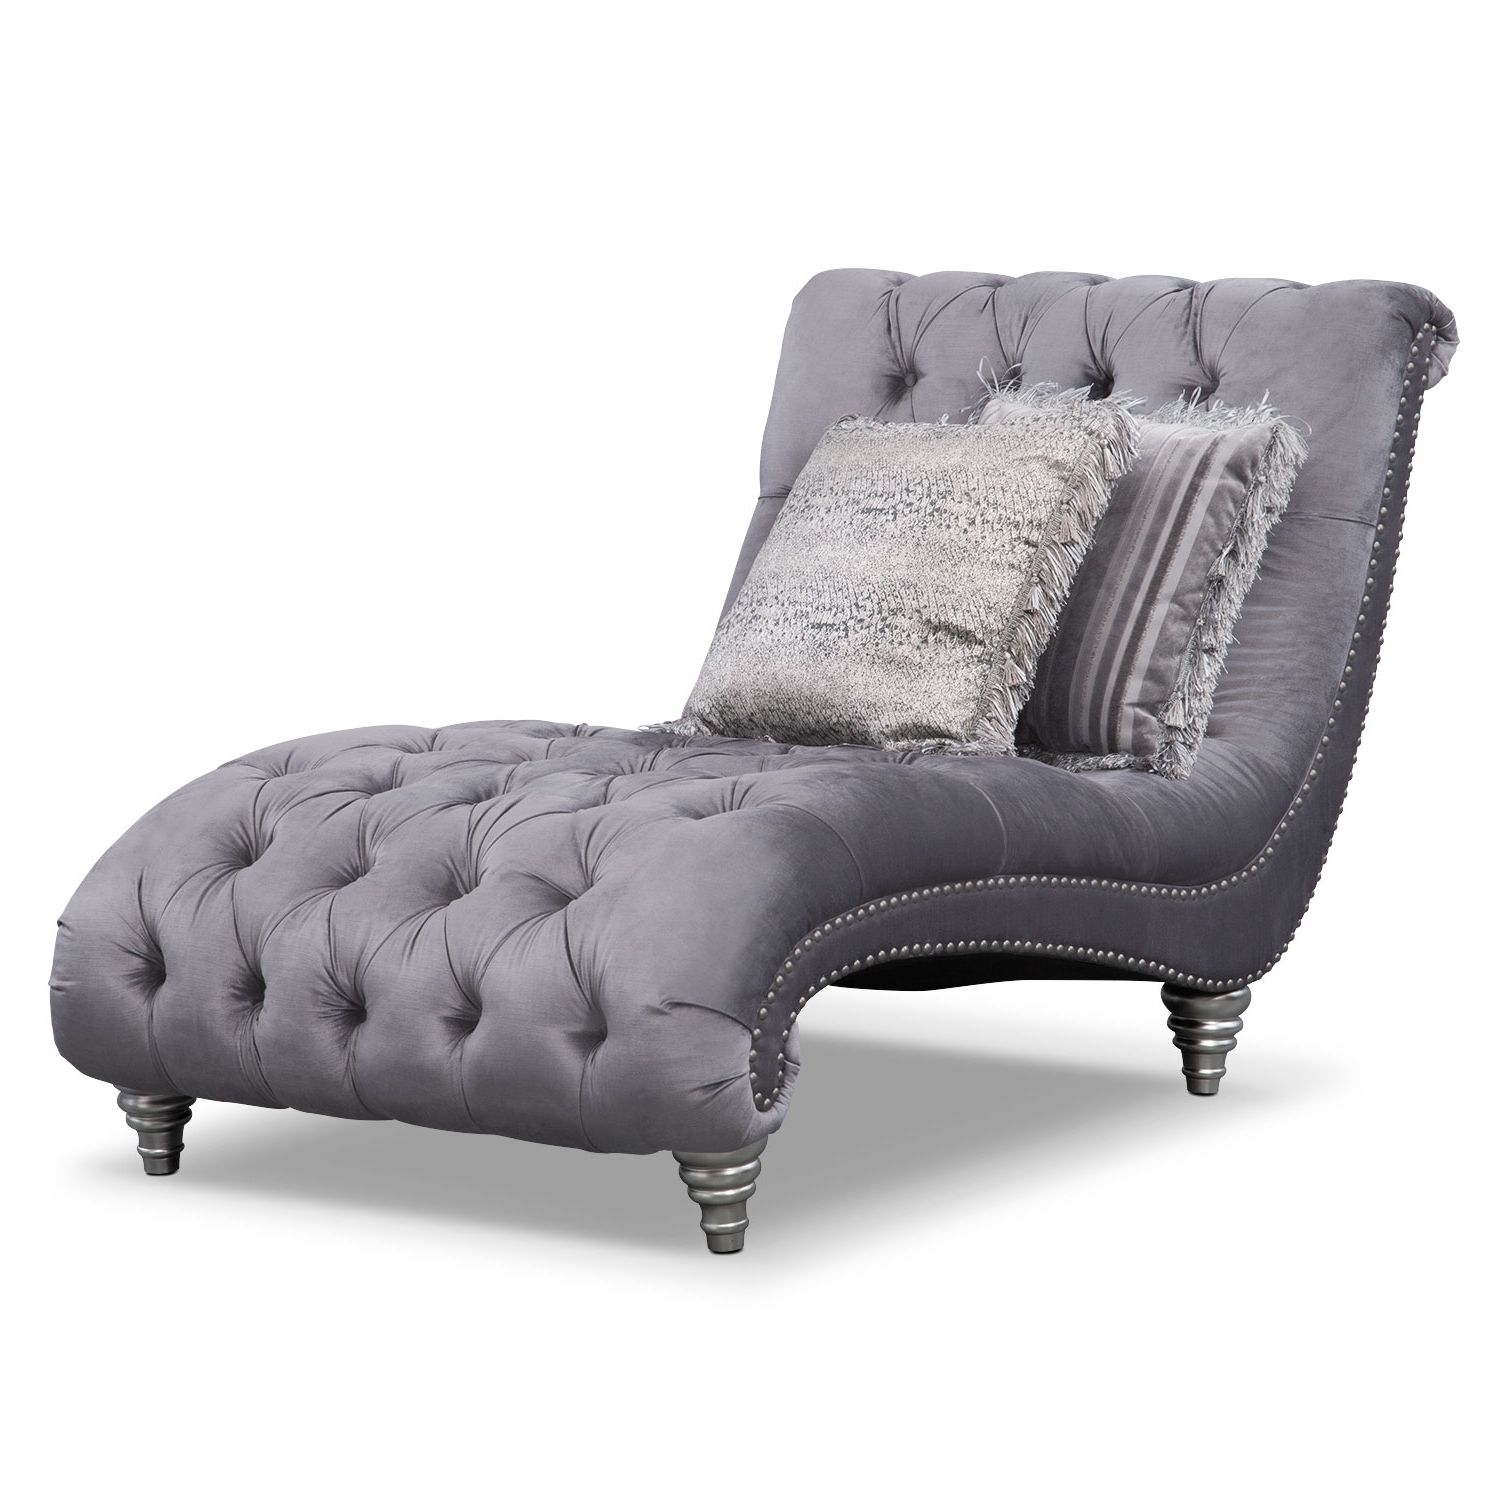 Gorgeous Gray Chaise Lounge With Brilliant Chaise Lounges American Regarding Latest Cheap Chaise Lounges (View 13 of 15)